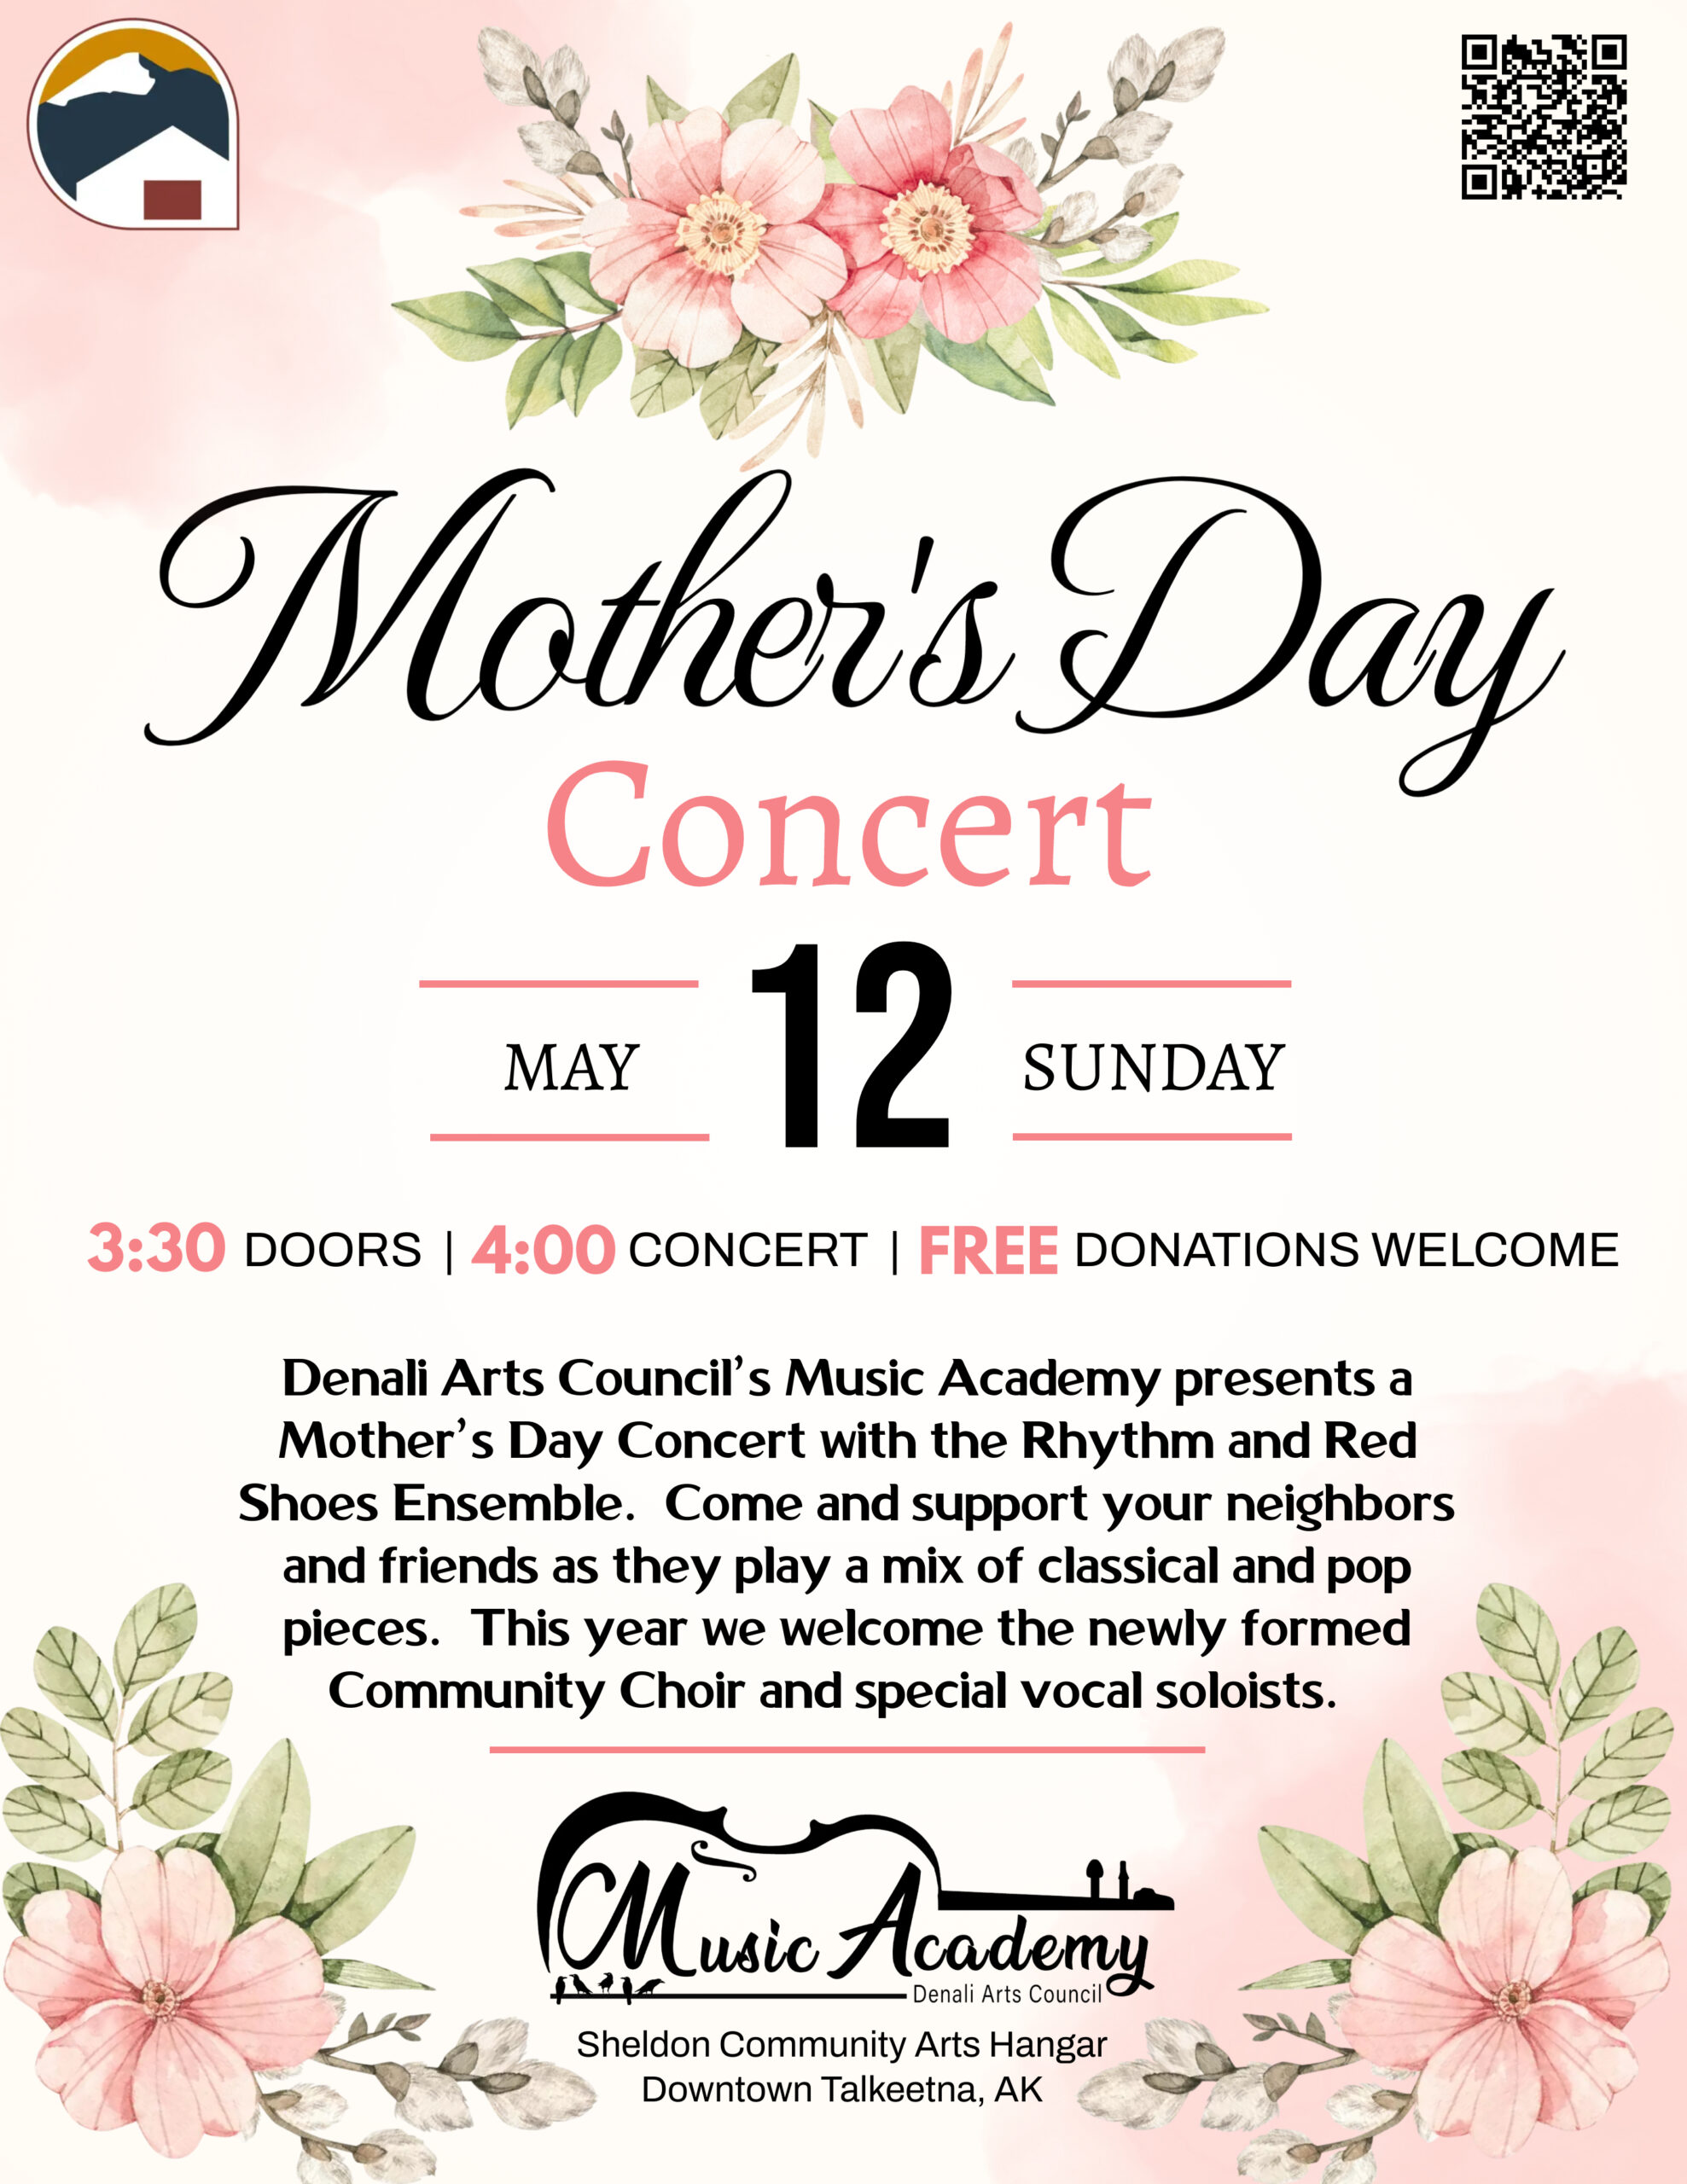 Mothers’ Day Concert